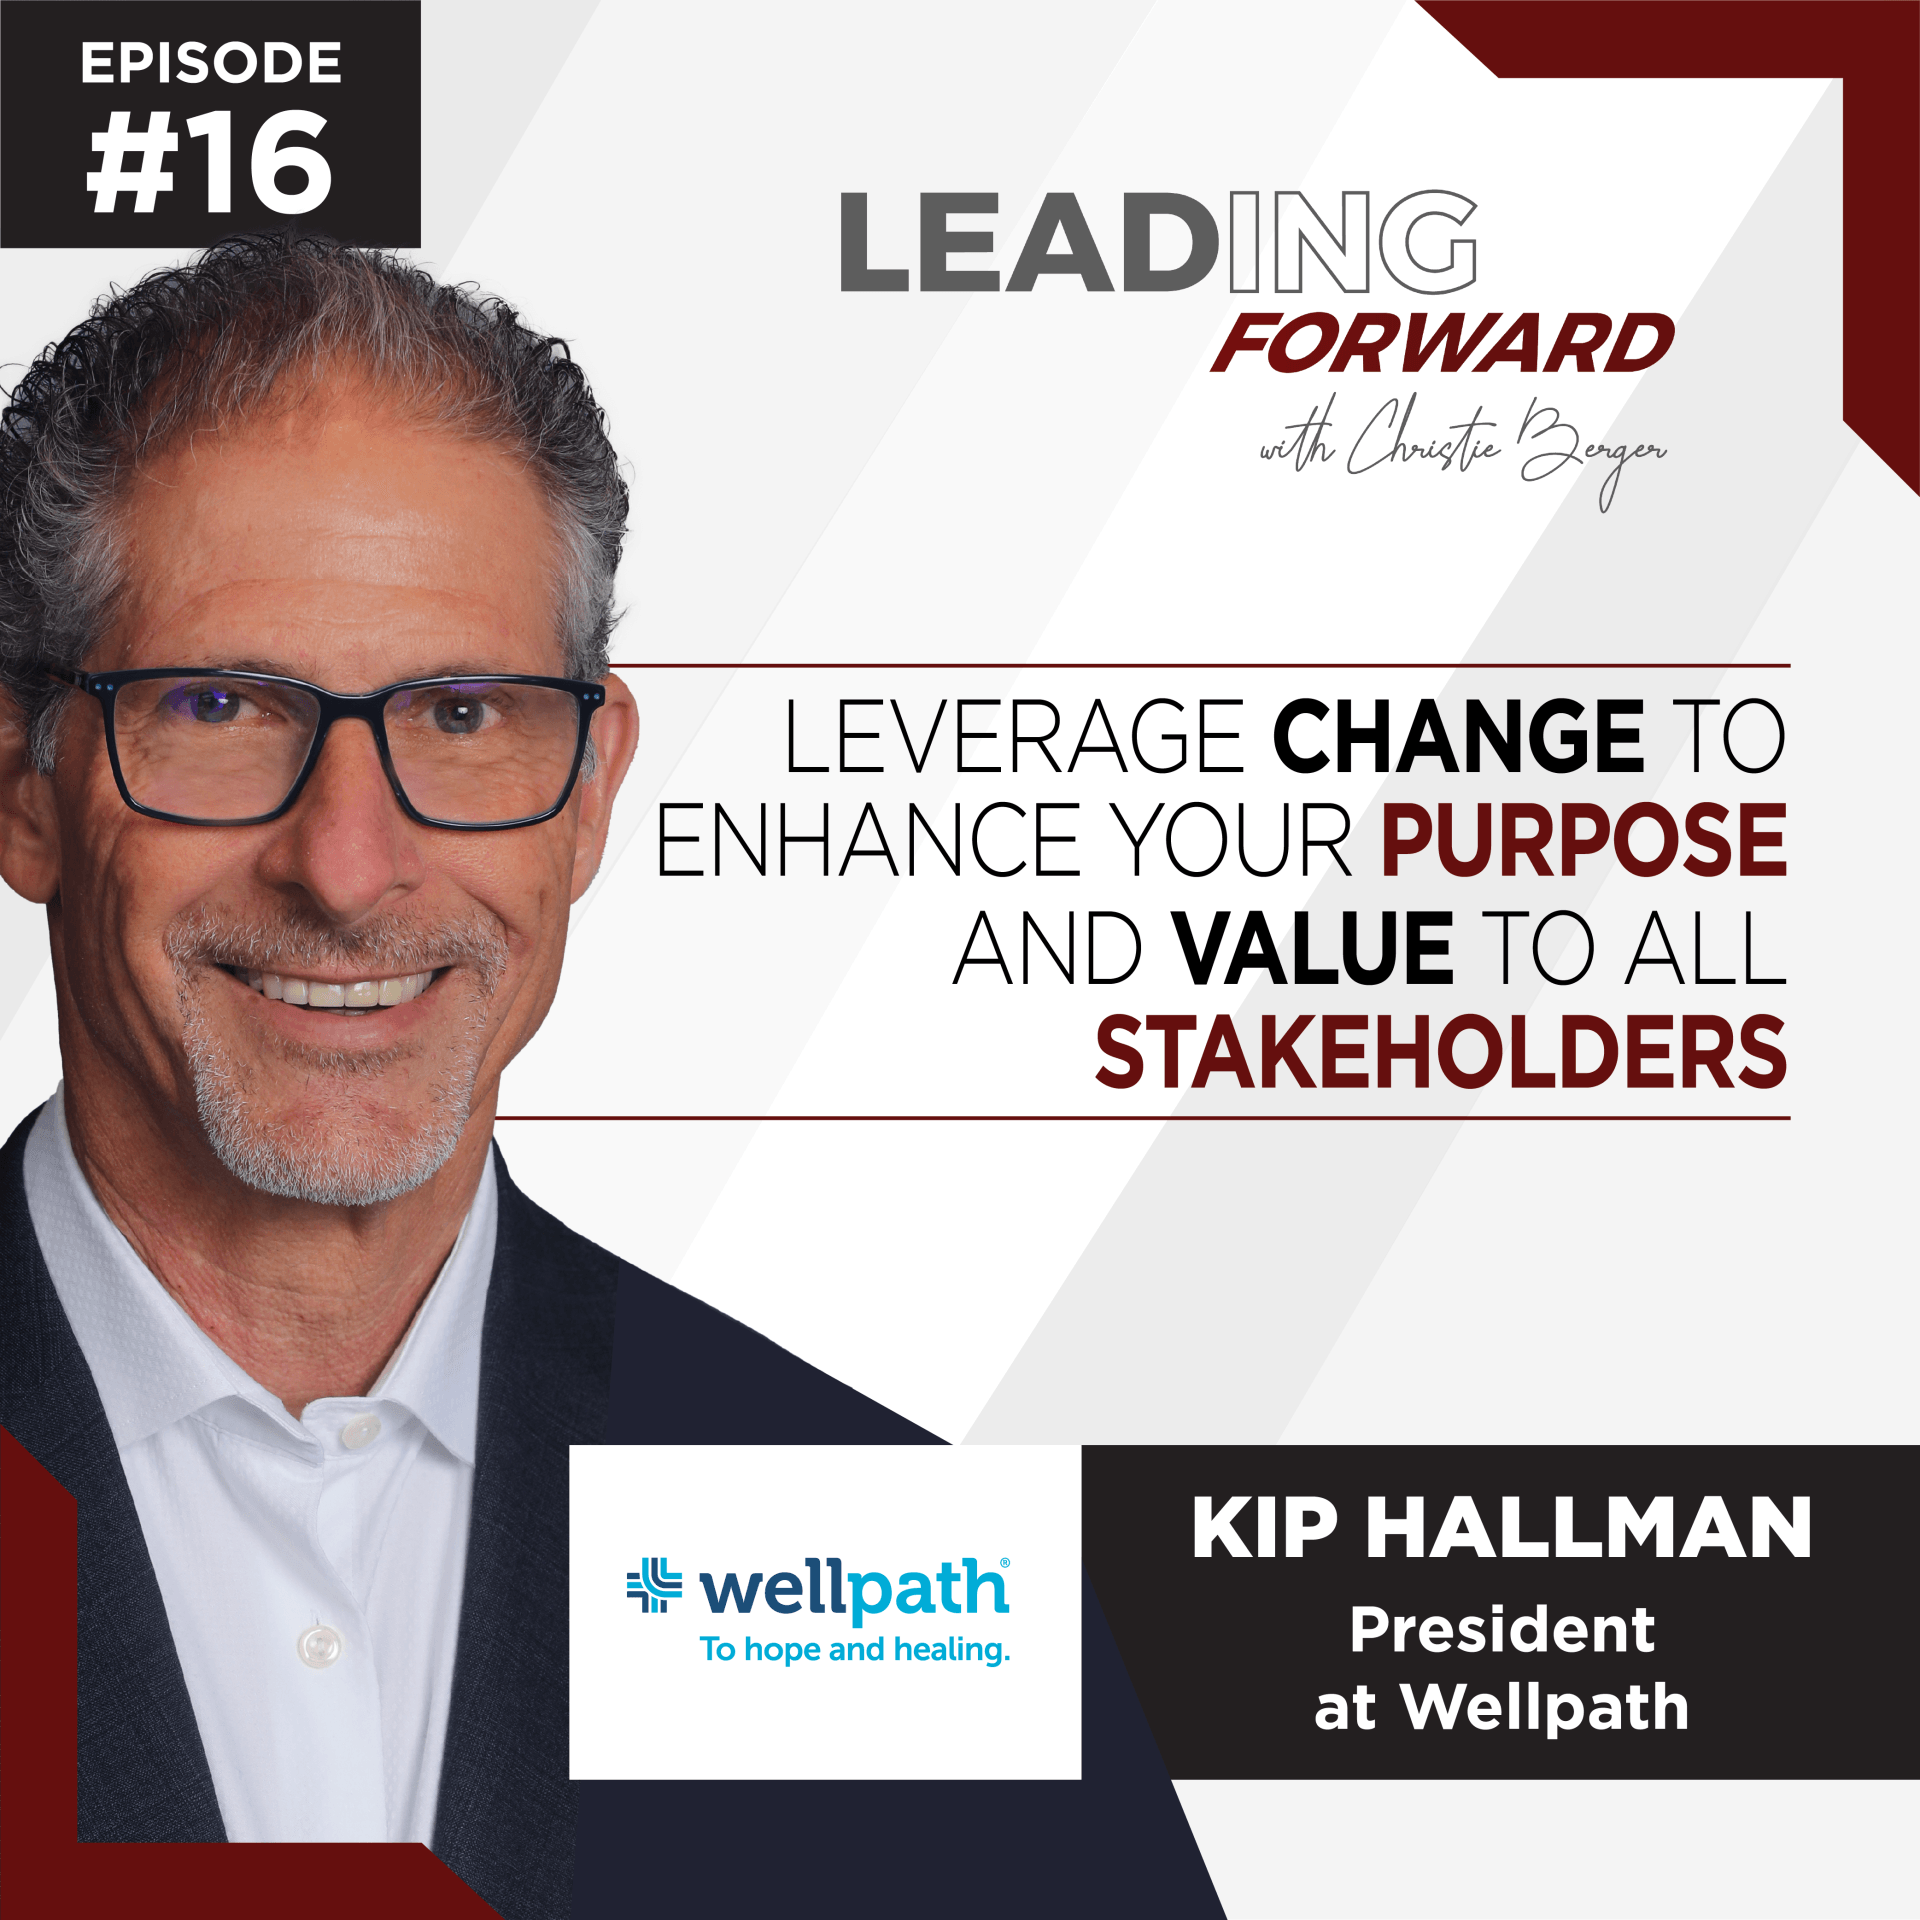 Kip Hallman is the President at Wellpath and was interviewed on Leading Forward-a podcast series full of meaningful conversation with leaders from multiple industries in and around Nashville, TN